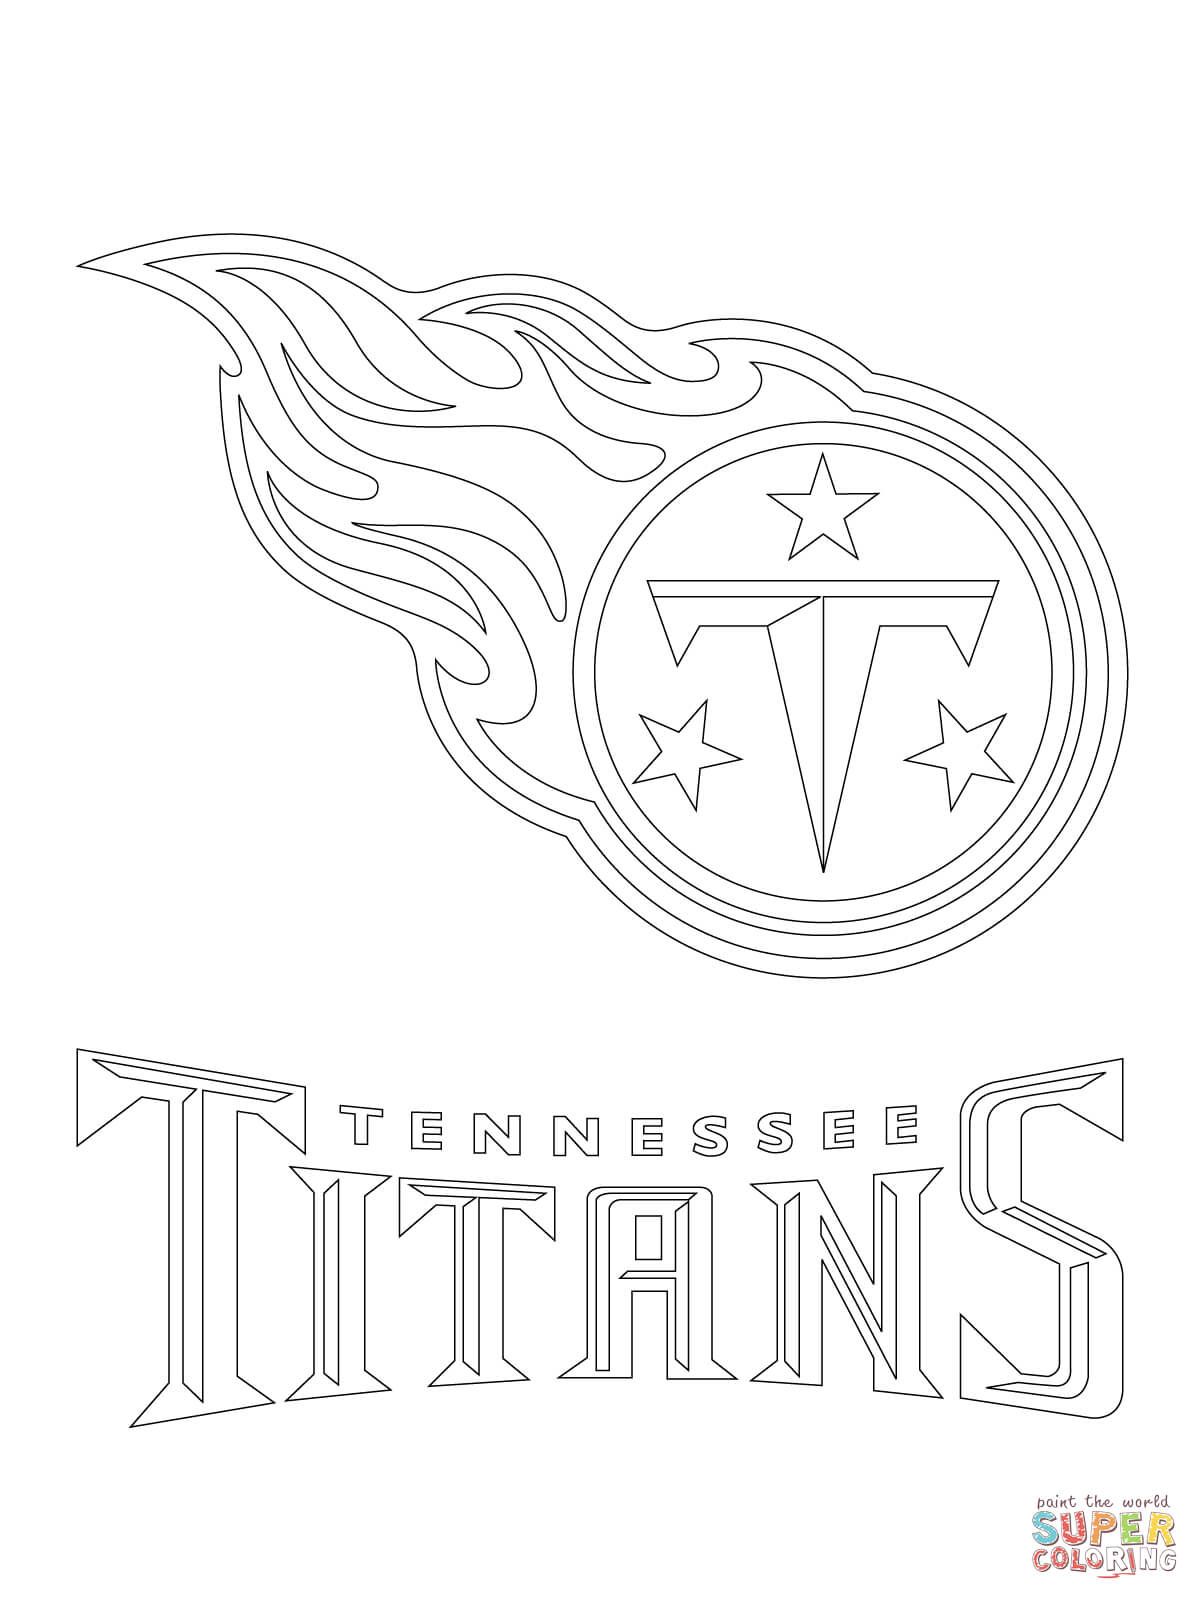 Tennessee Titans Logo | Super Coloring | Football coloring pages, Tennessee  titans logo, Tennessee titans